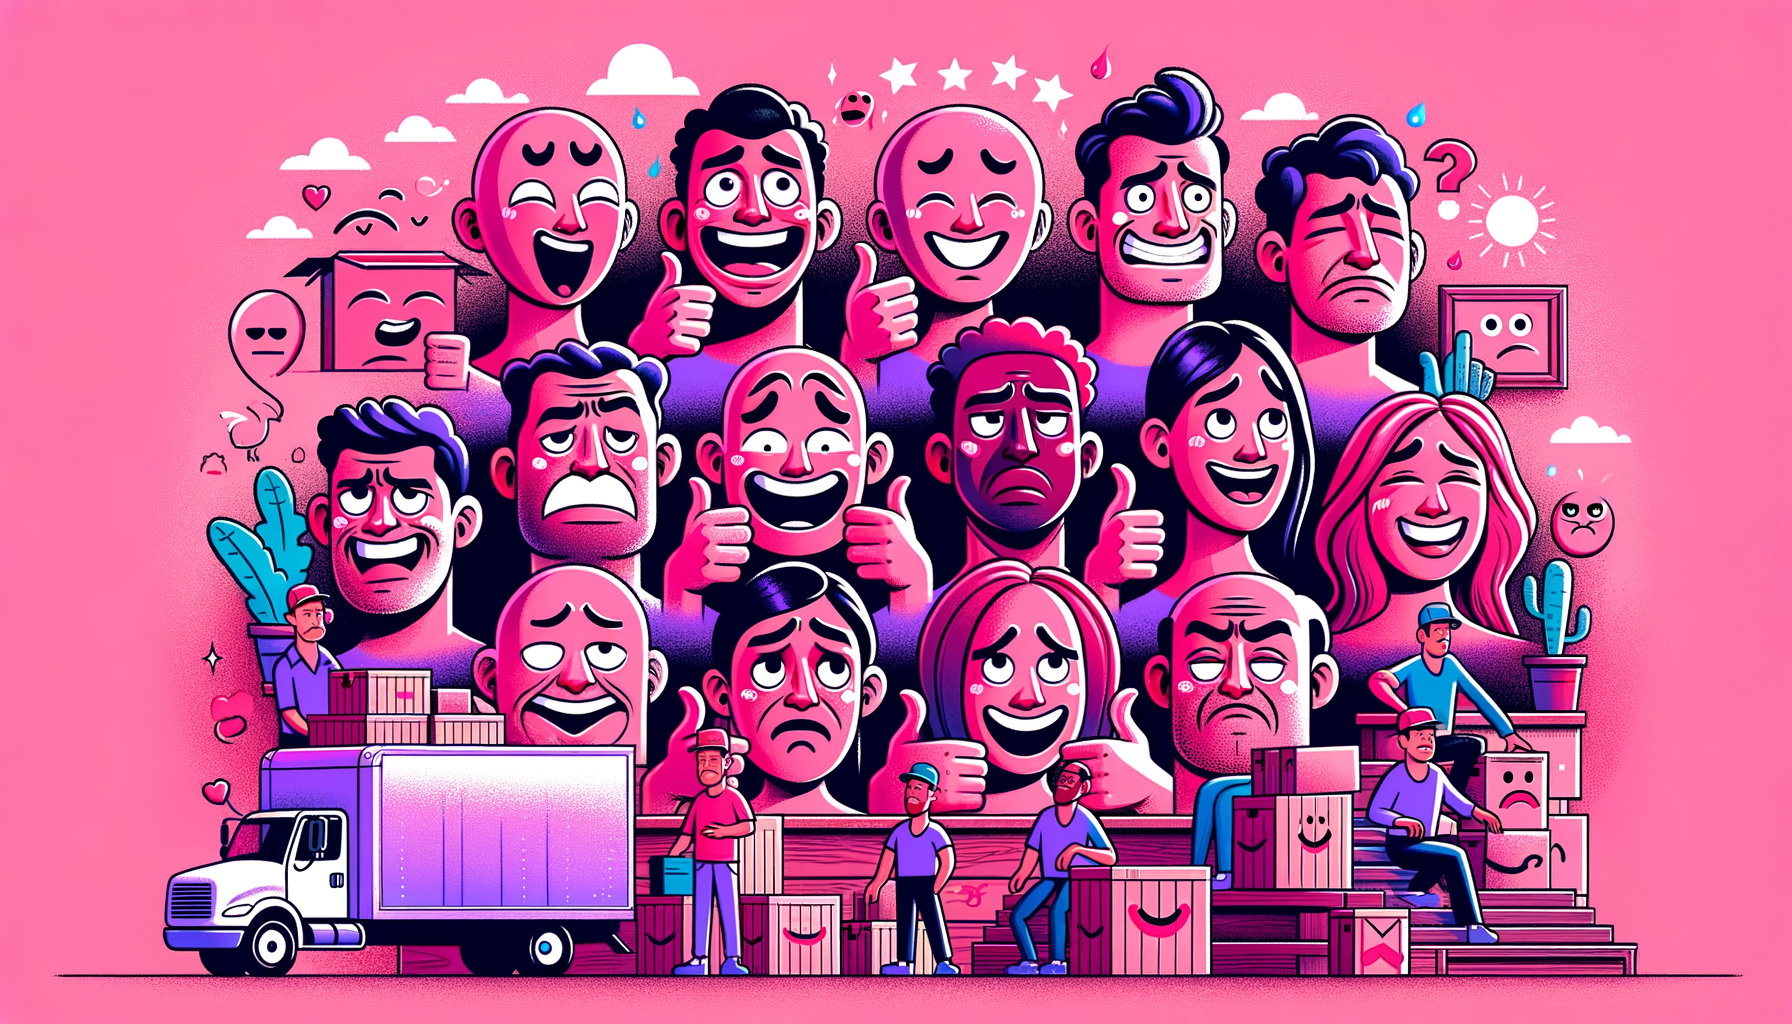 Cartoon illustration featuring a range of customer experiences in fuschia tones, showing smiling, frowning, and puzzled faces with moving boxes and a moving truck in the background, highlighting the spectrum of feedback for moving services.